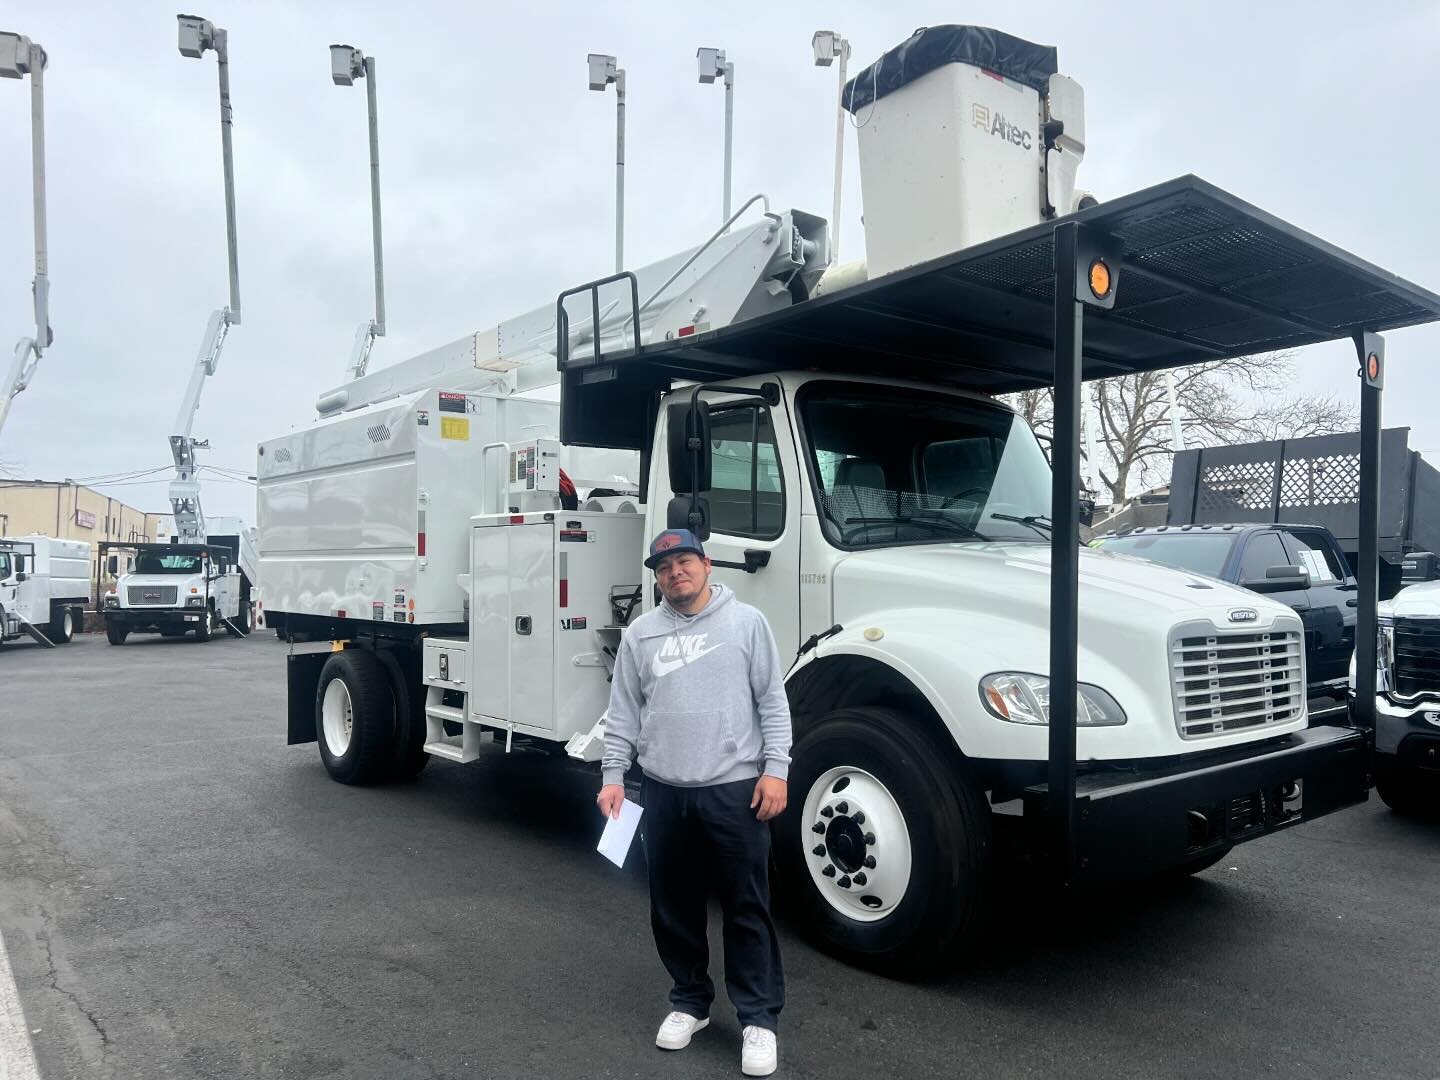 Congrats to Samuel from Master Tree Service out of New York on the 2015 Freightliner Bucket Truck! We appreciate your business, time to go remove some trees